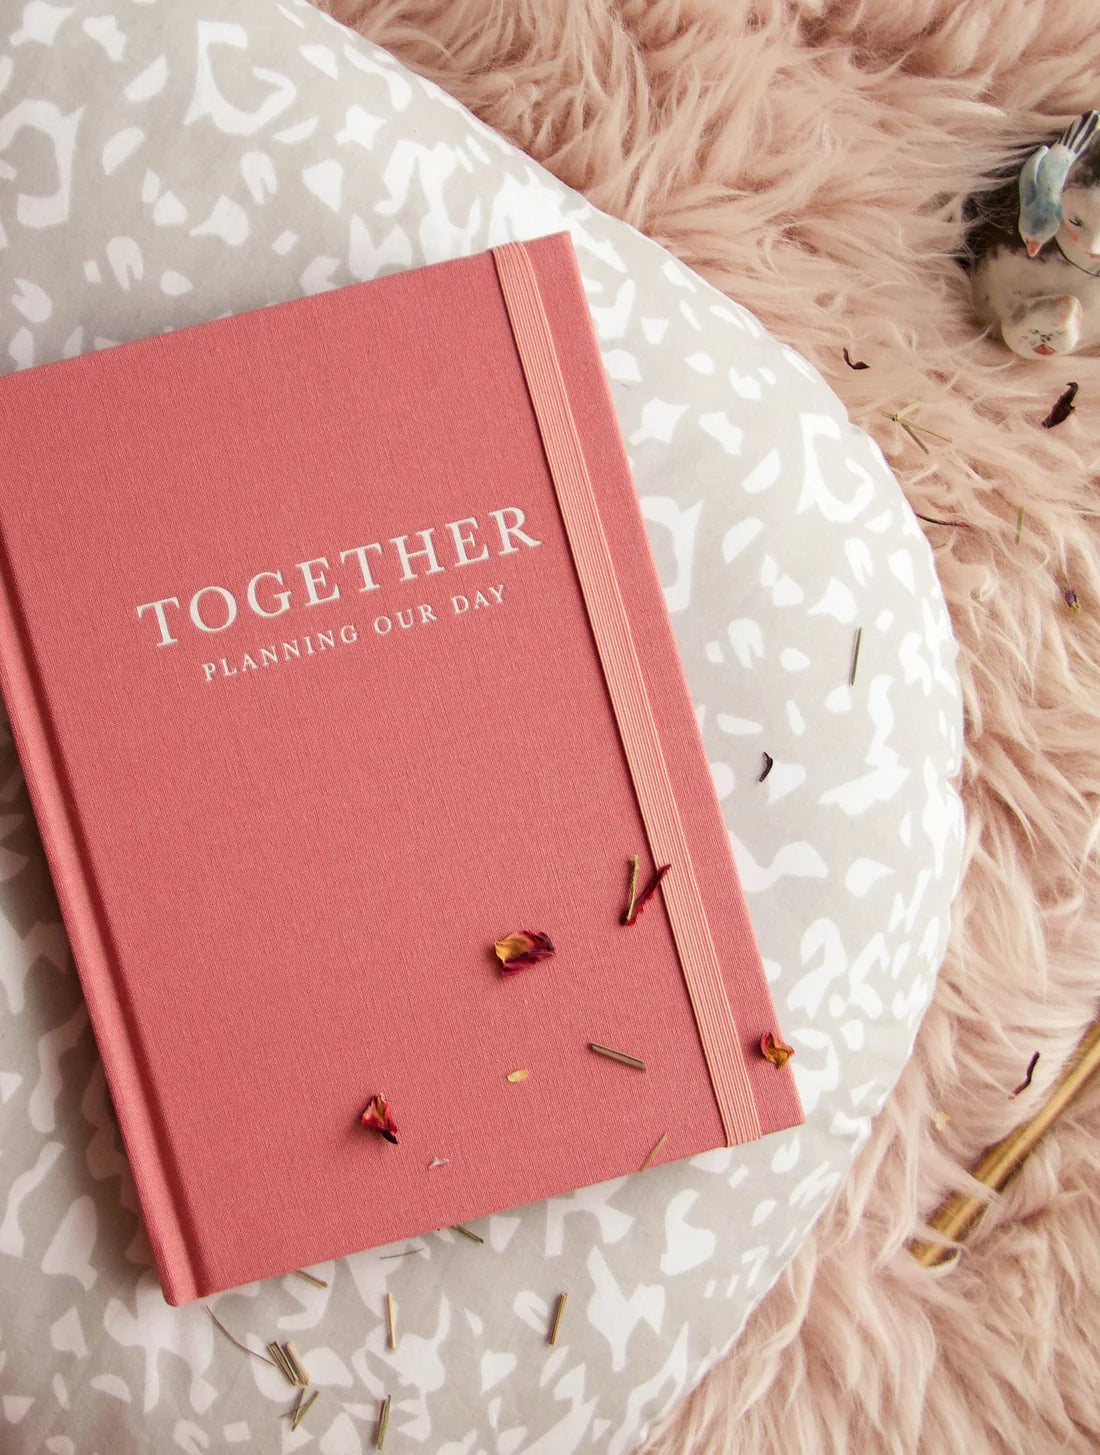 Together Planning Our Day - Wedding Planner